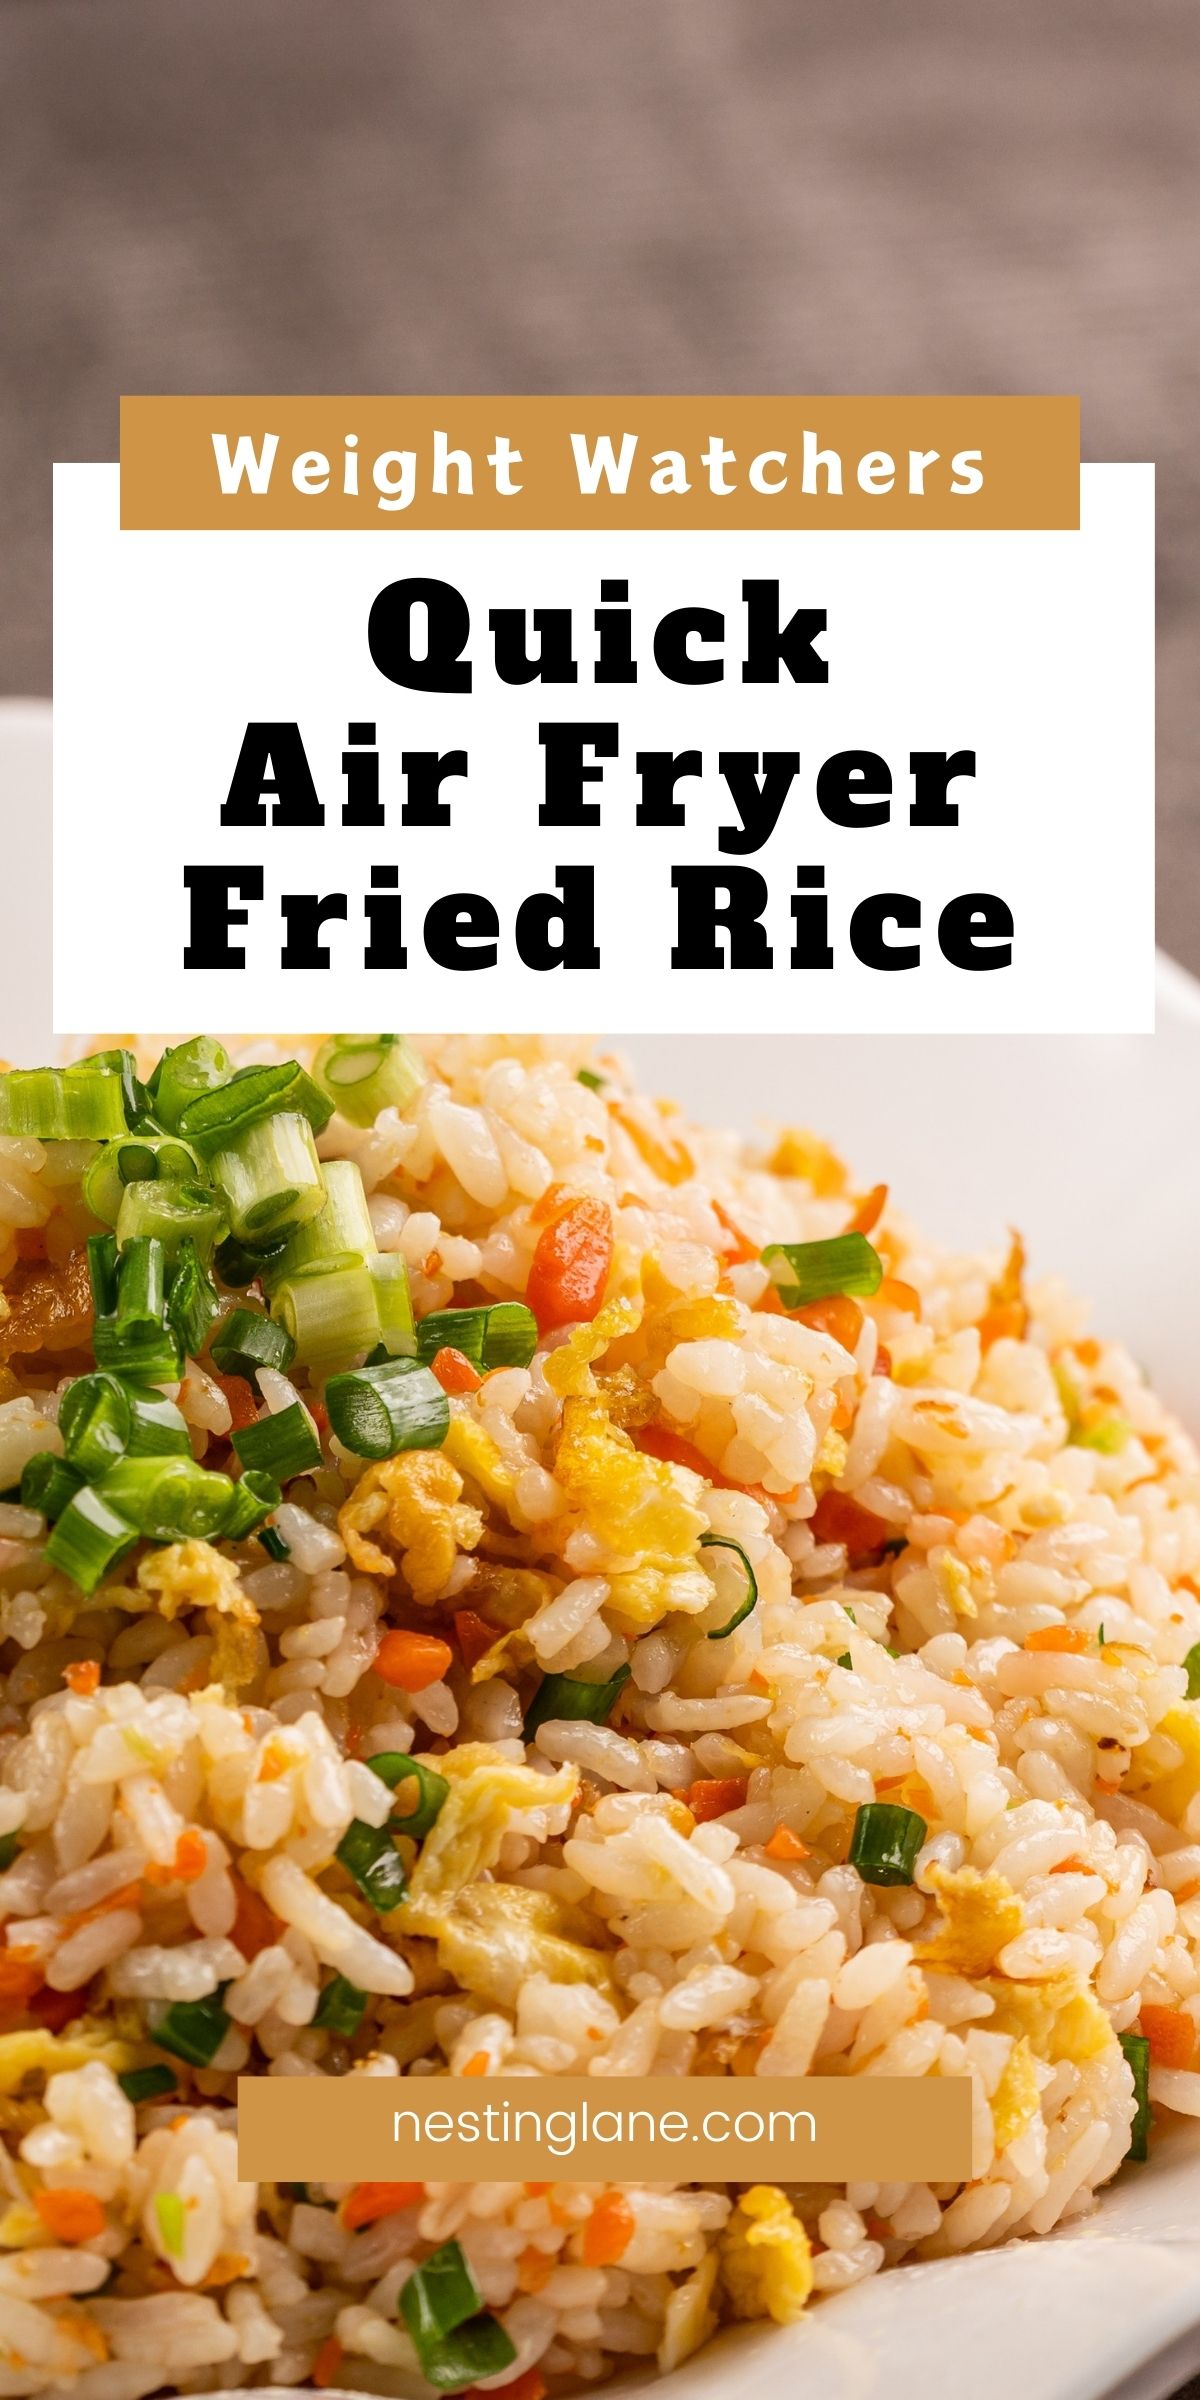 WW Quick Fried Rice (Air Fryer) Graphic.